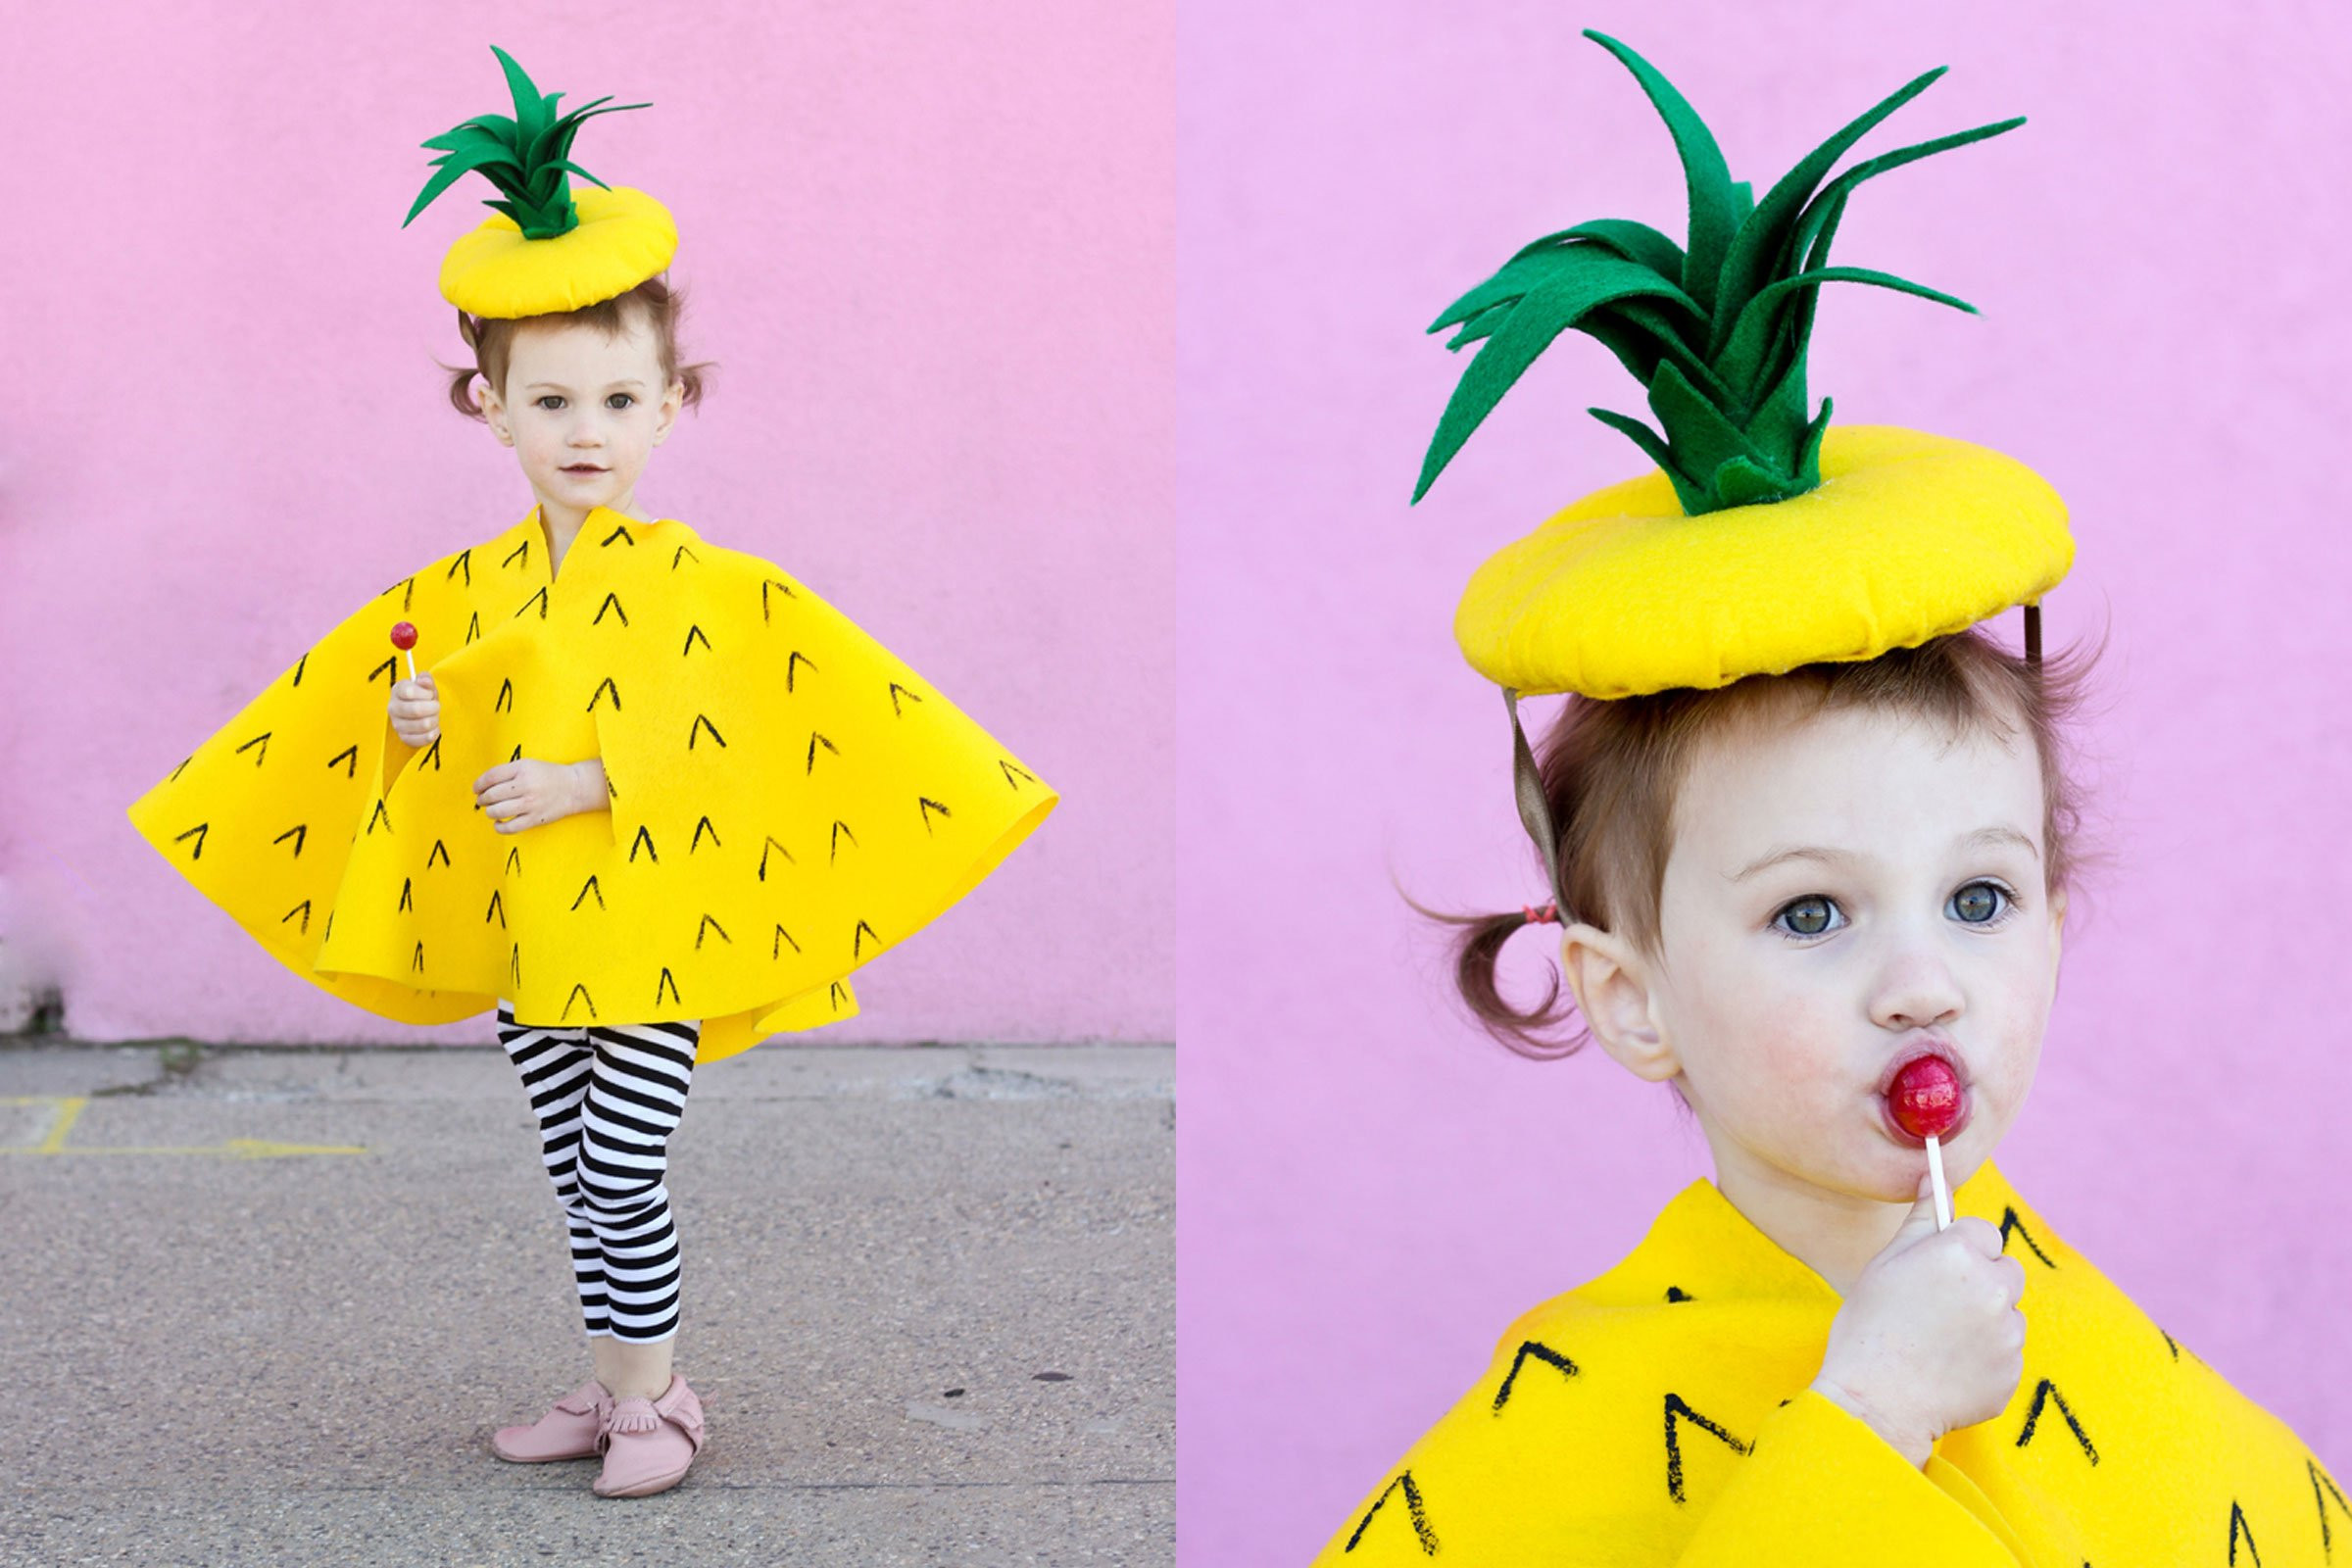 DIY Halloween Costume For Toddlers
 Cheap DIY Halloween Costumes for Kids